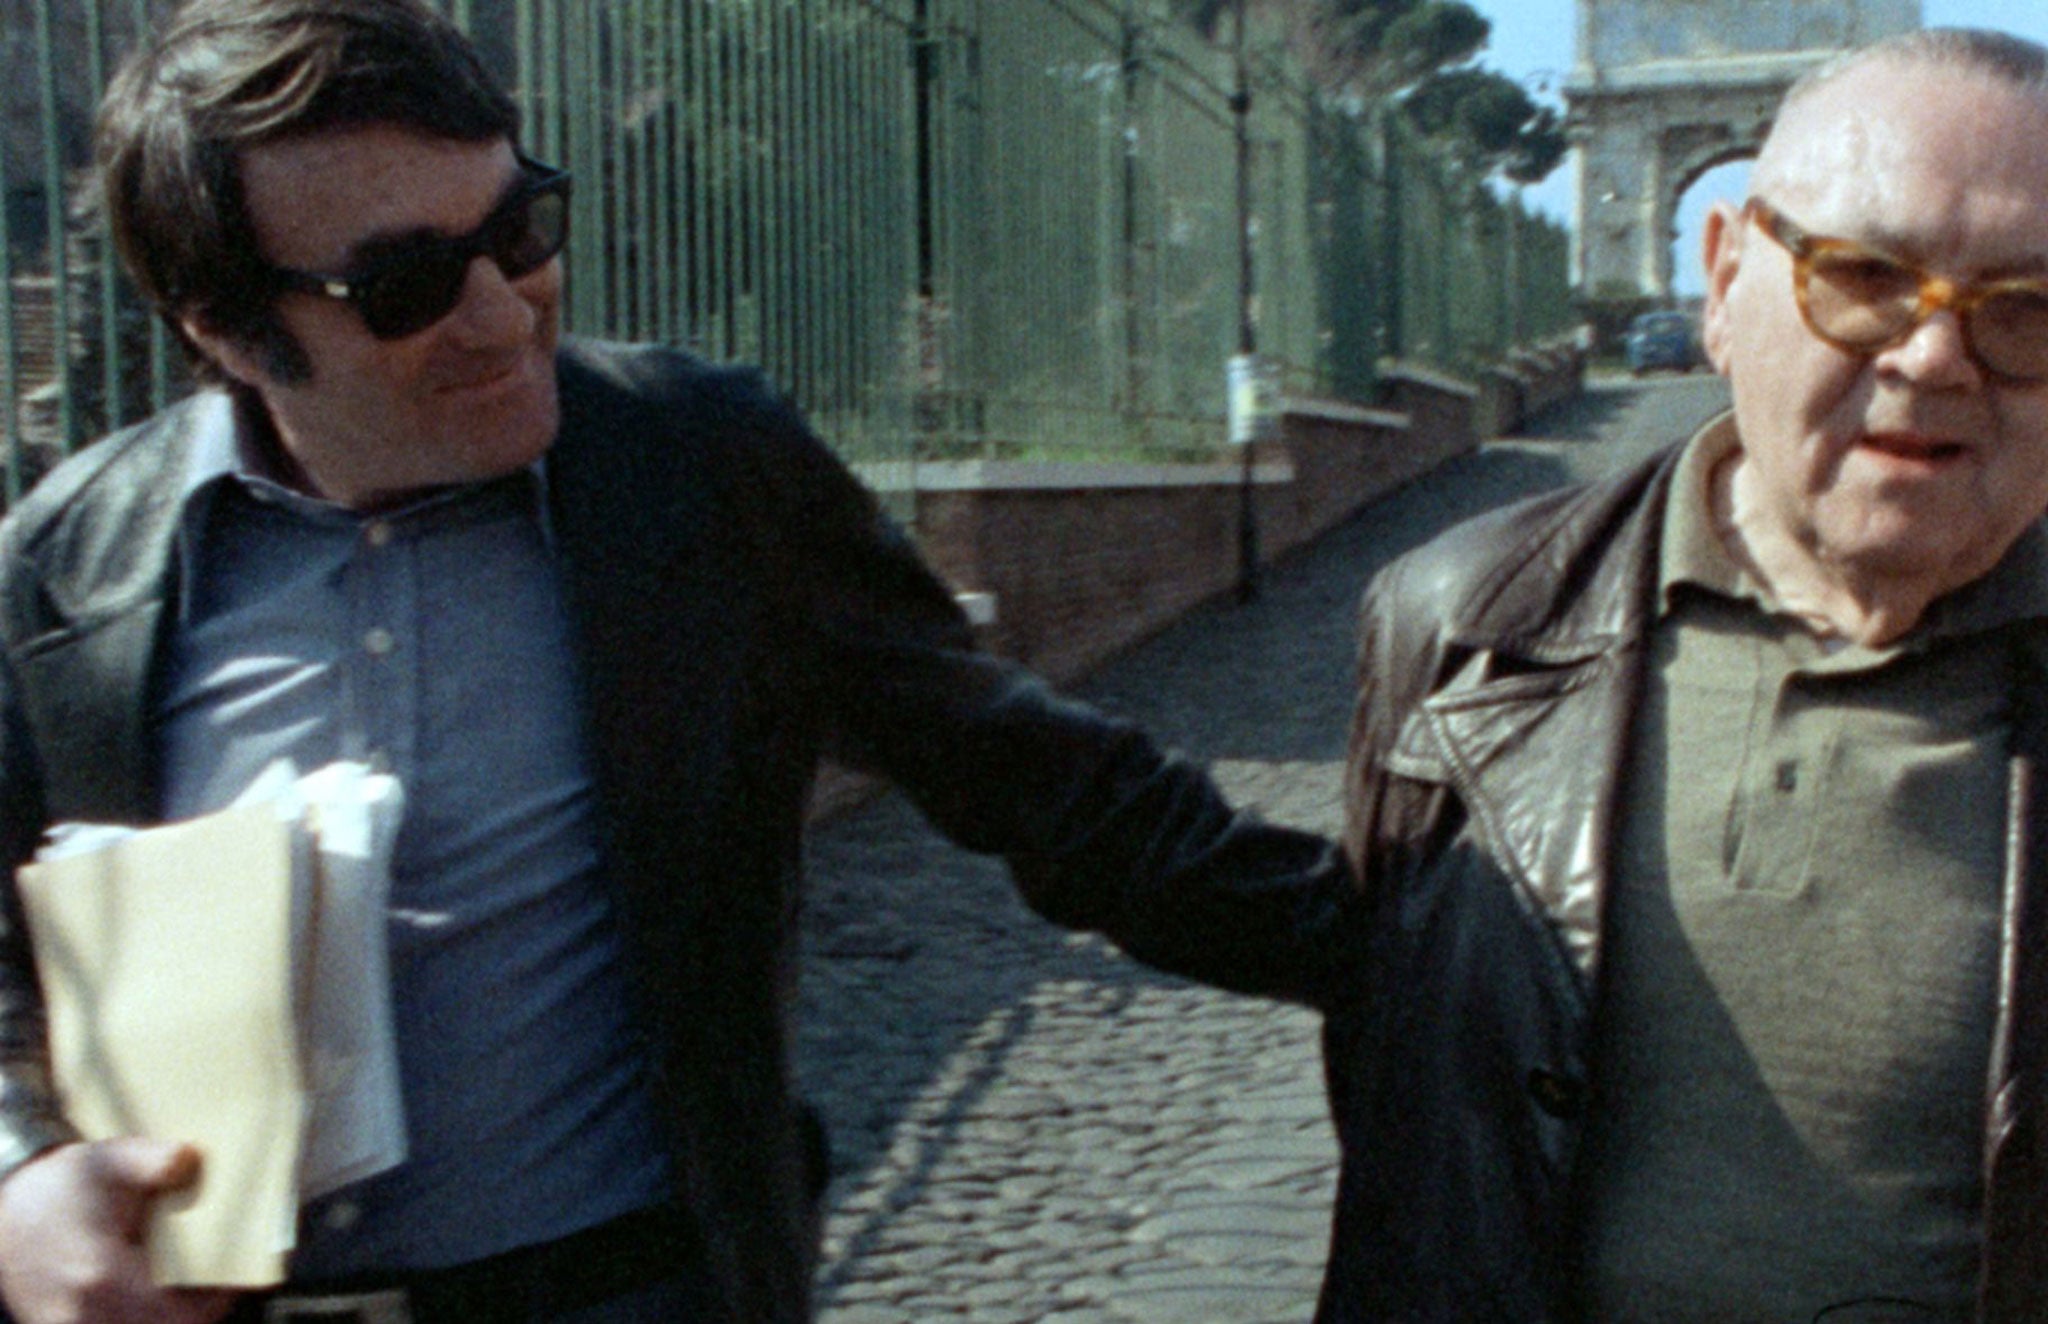 Claude Lanzmann and Benjamin Murmelstein in 'The Last of the Just'